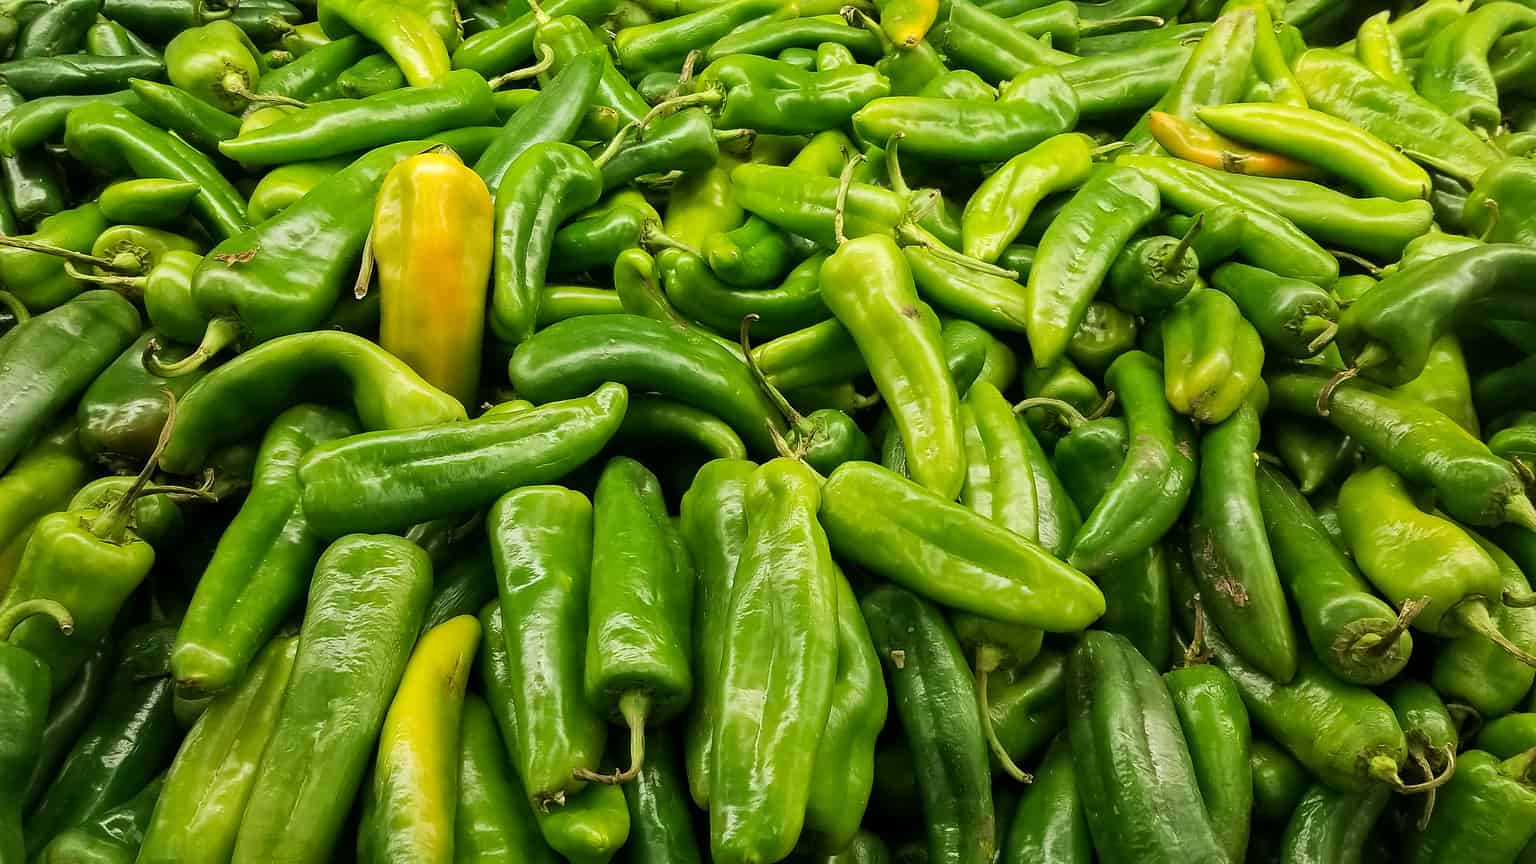 10 Types Of Hot Peppers - All Ranked - AZ Animals